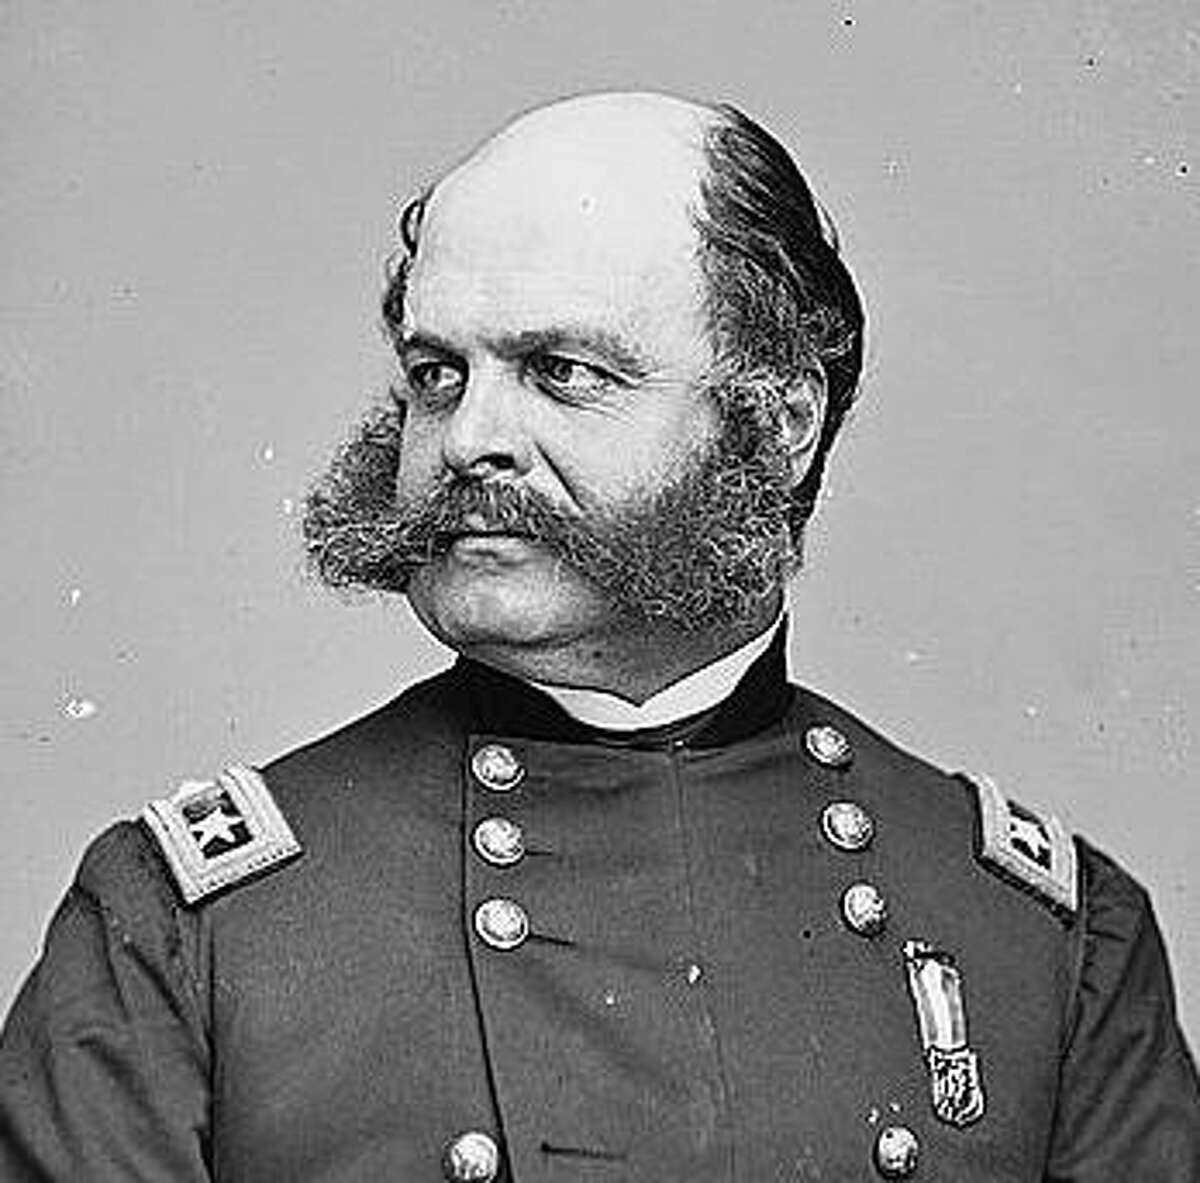 If he were alive today, Maj. Gen. Ambrose Burnside would be a poor candidate for an N95 mask.